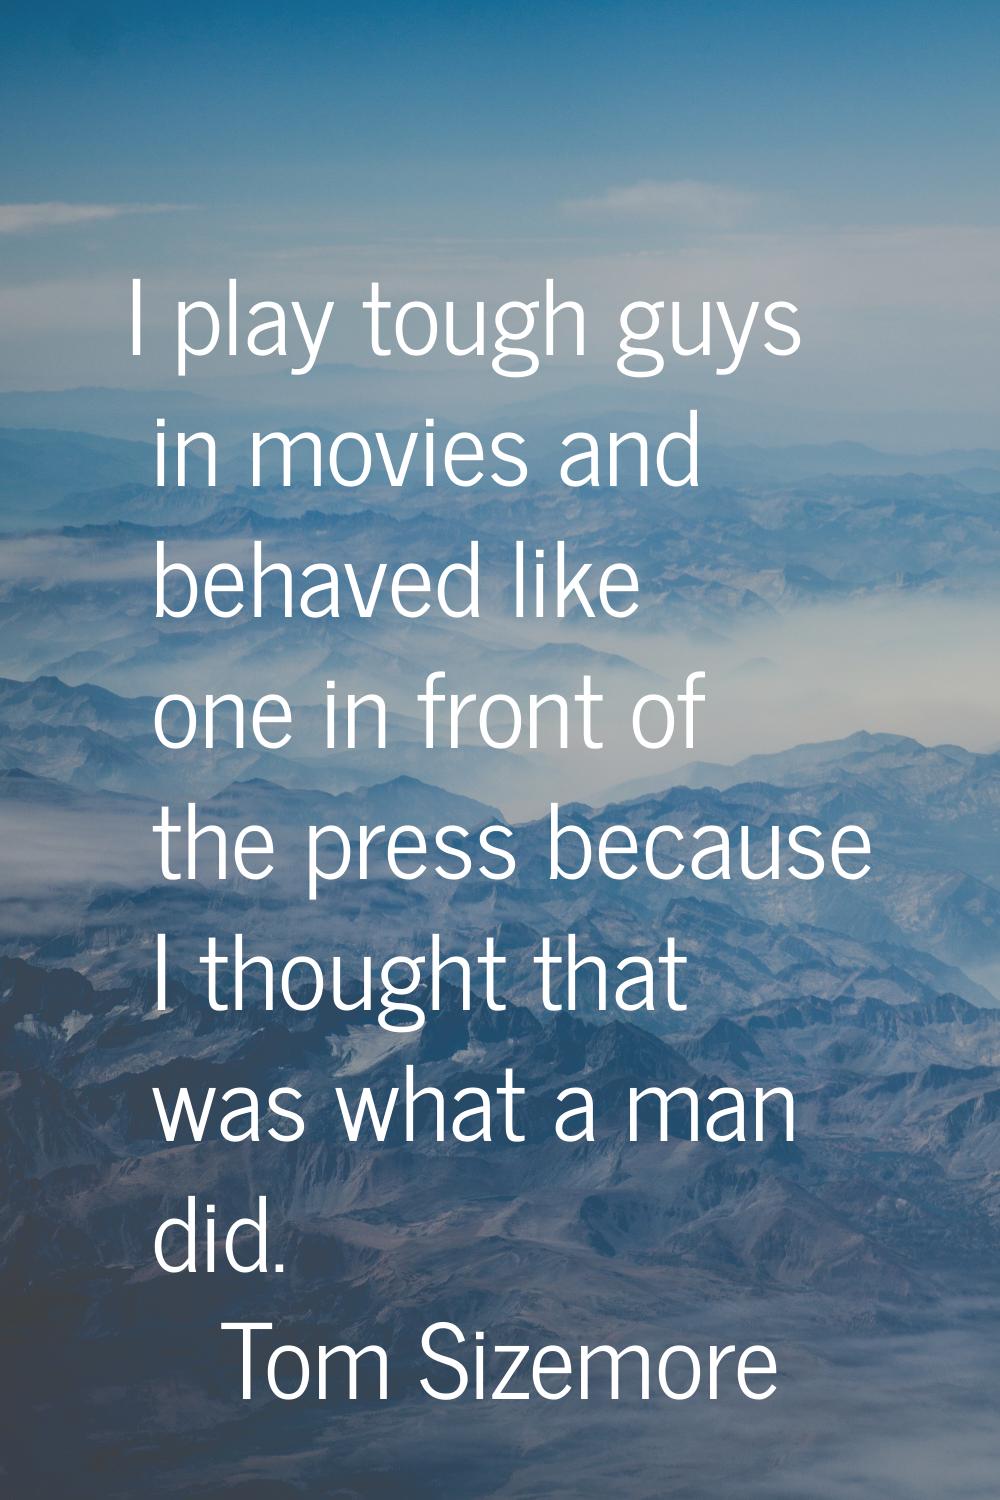 I play tough guys in movies and behaved like one in front of the press because I thought that was w